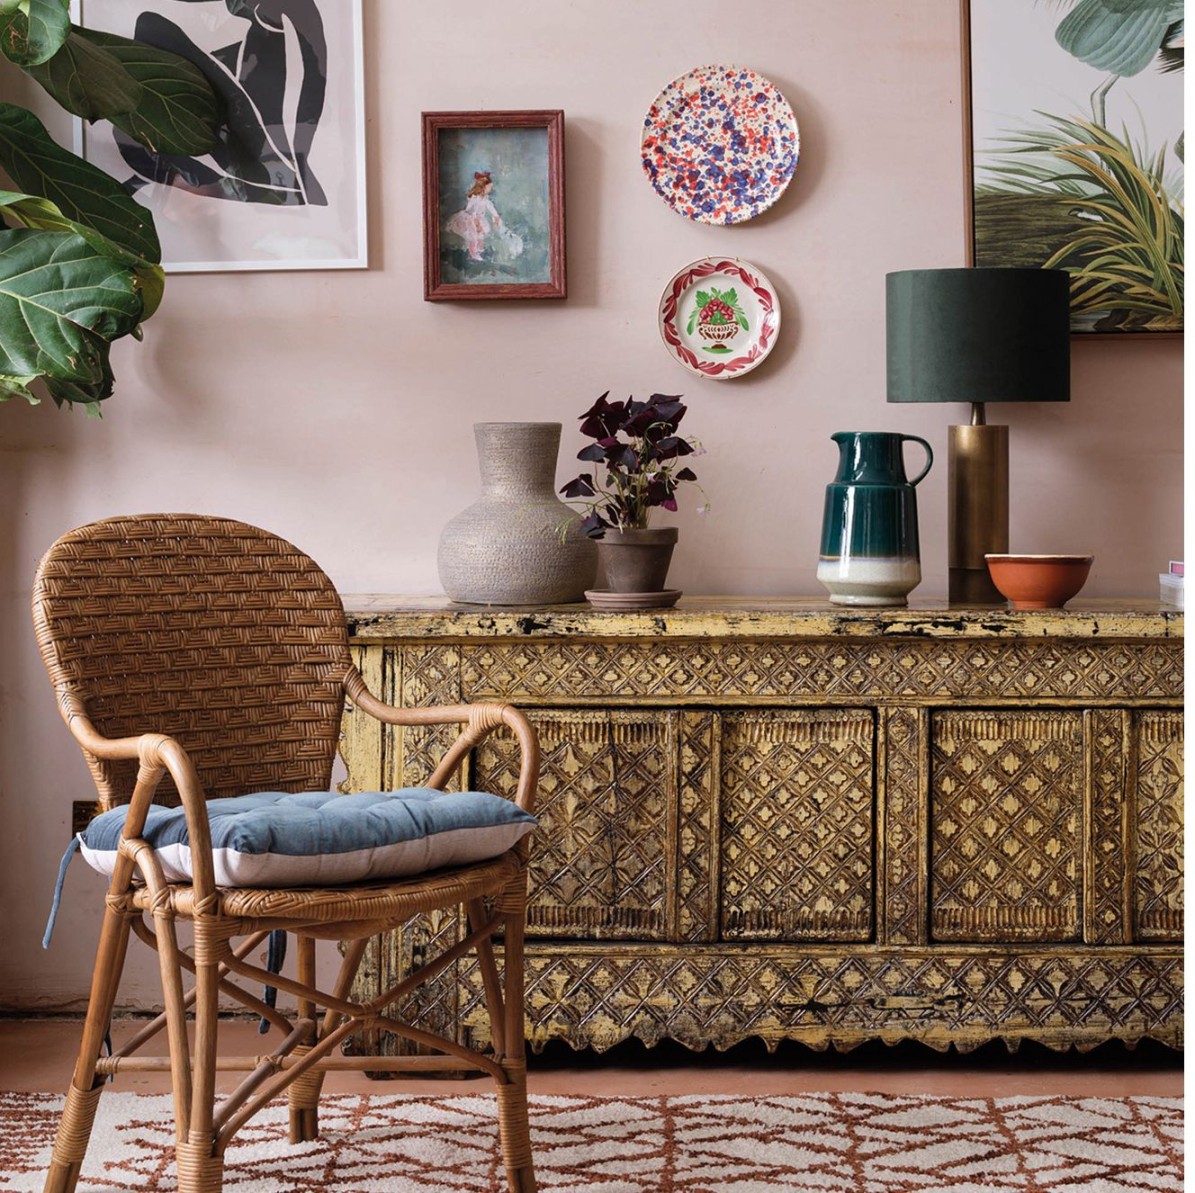 of the best online homeware and furniture stores in the UK